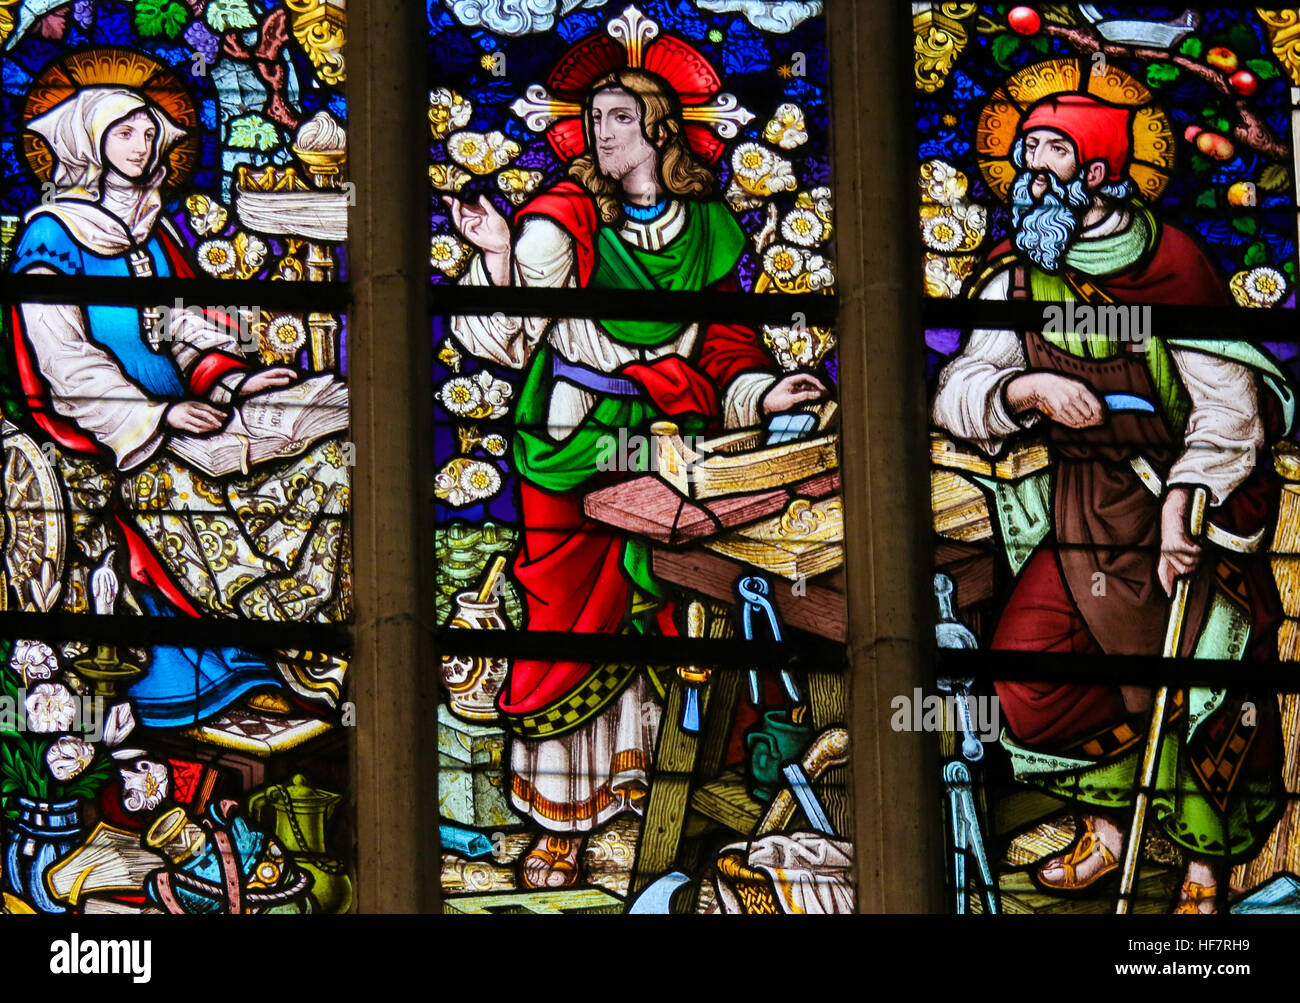 Stained Glass depicting Jesus Christ at work as a carpenter, with Joseph and Mary, in the Cathedral of Saint Bavo in Ghent, Belgium. Stock Photo